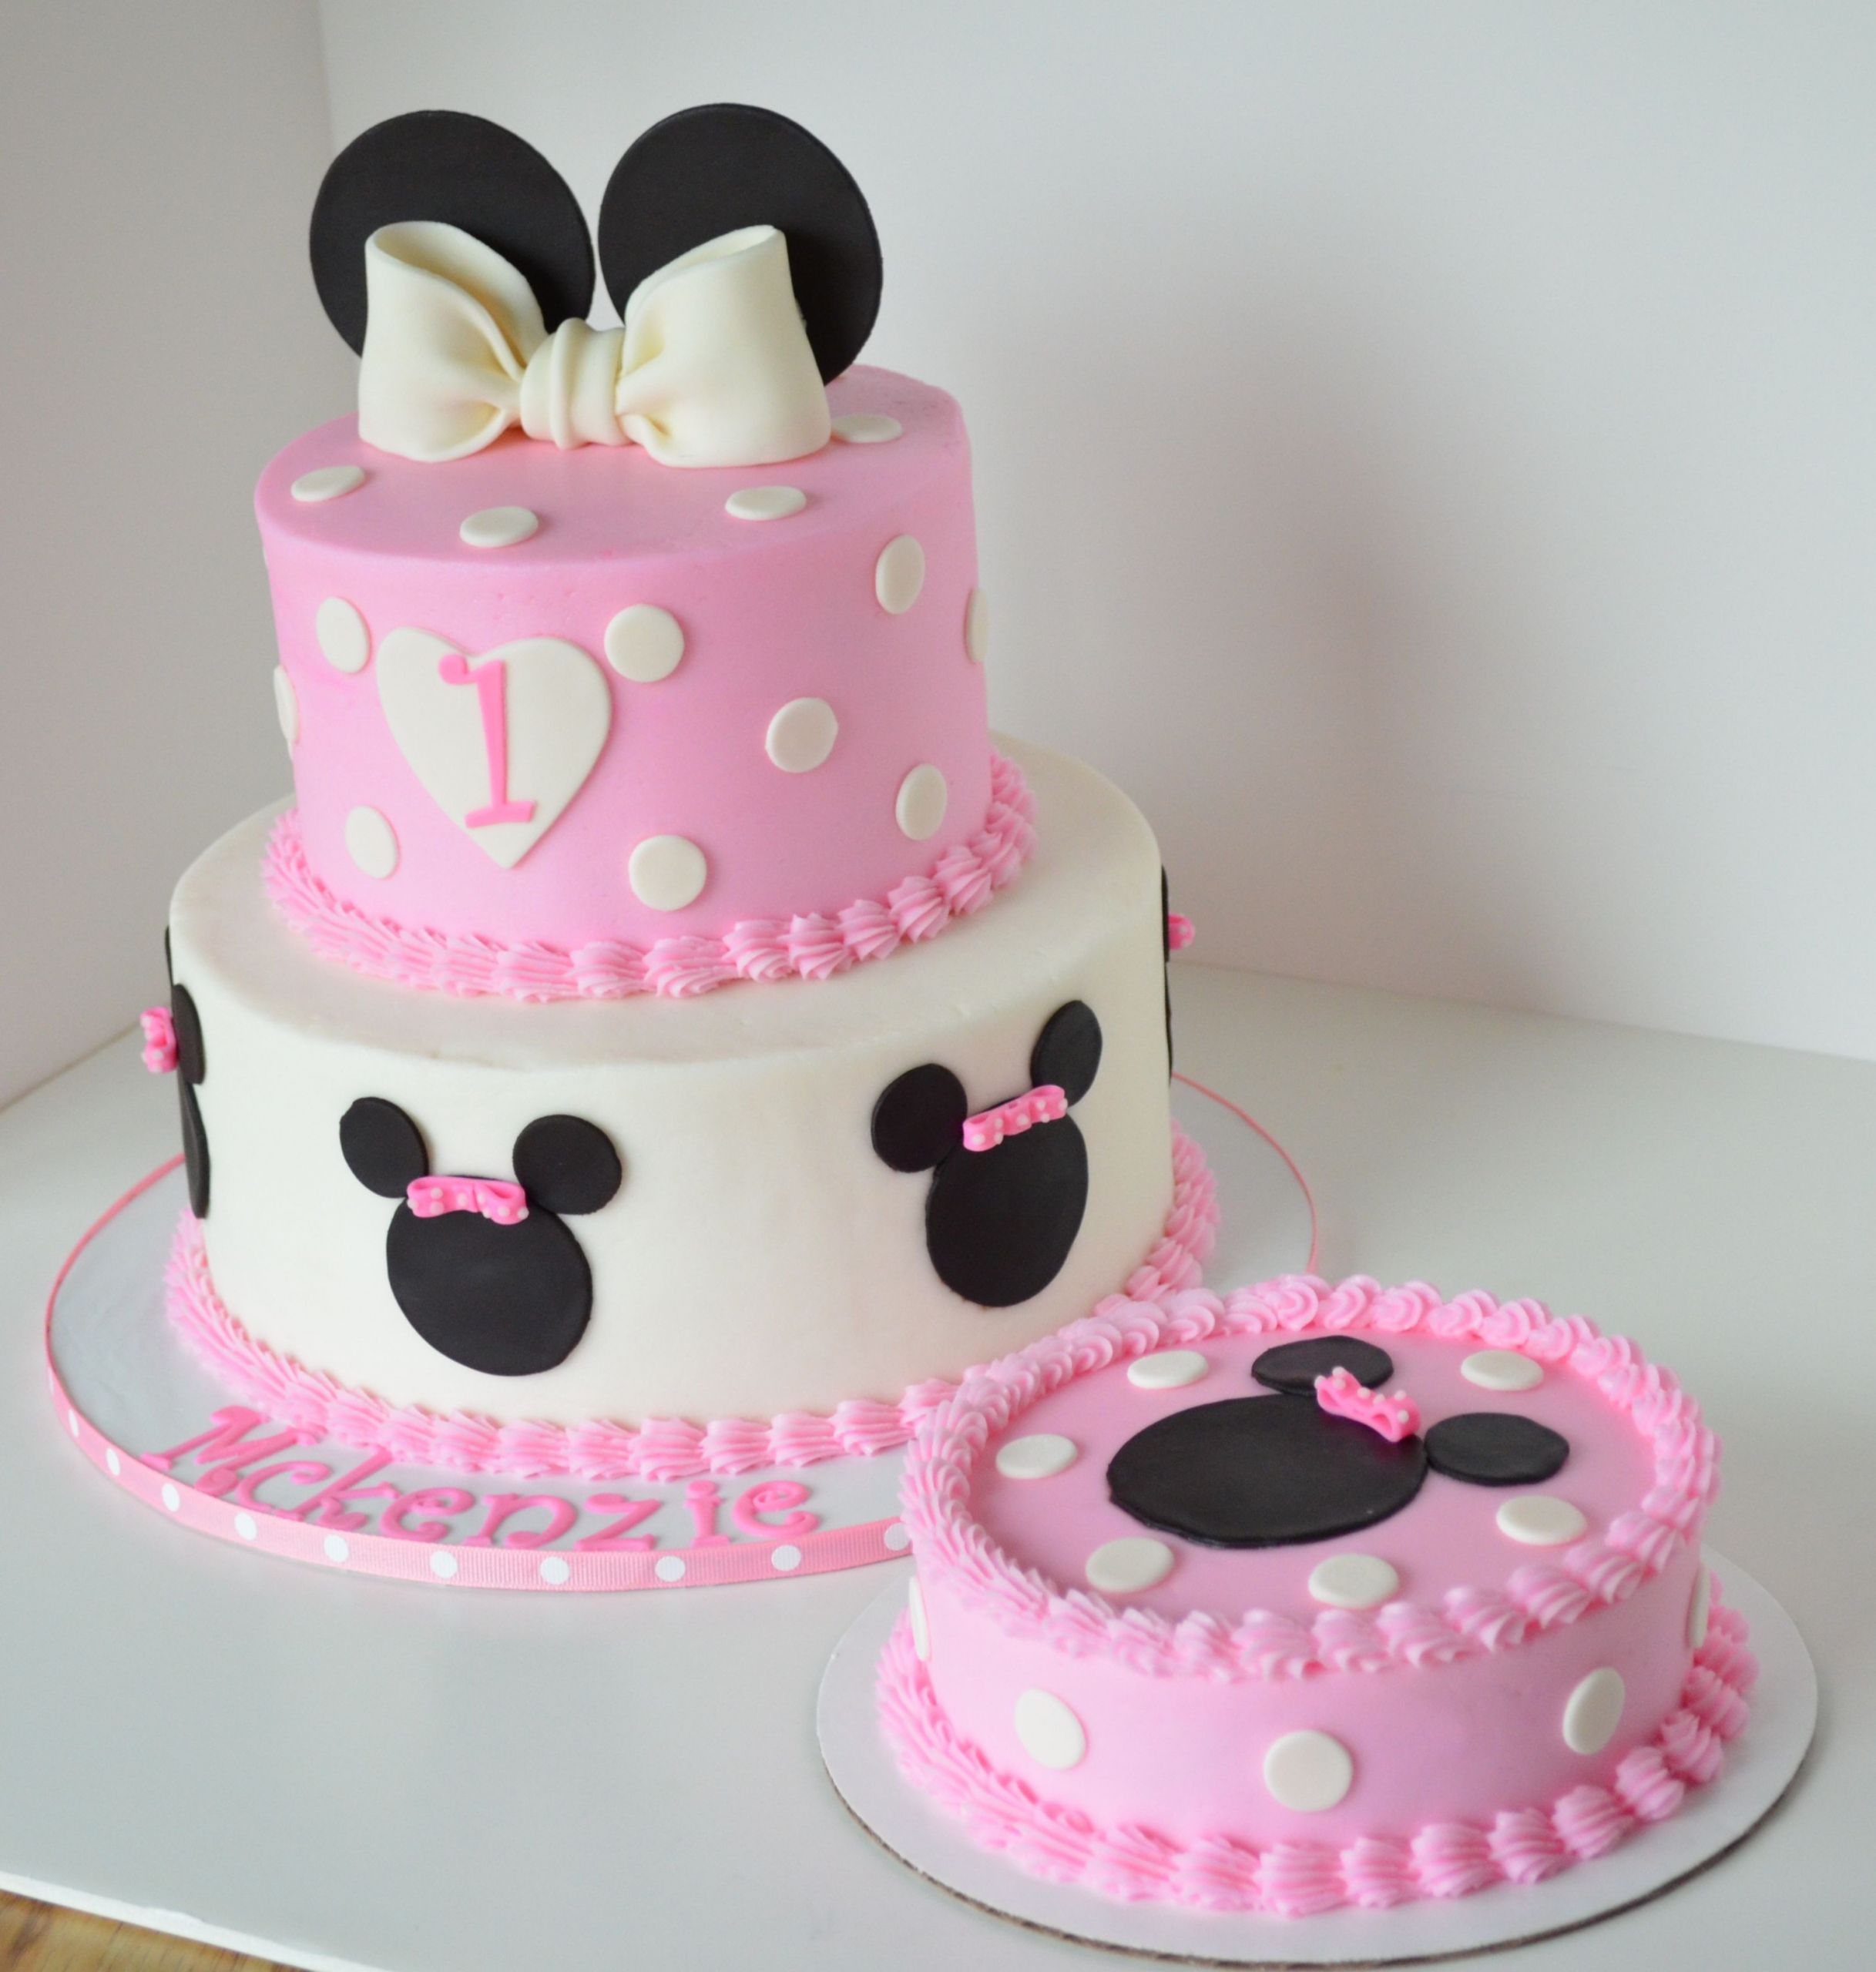 Minnie Mouse 1st Birthday Cakes
 Minnie Mouse And Matching Smash Cake